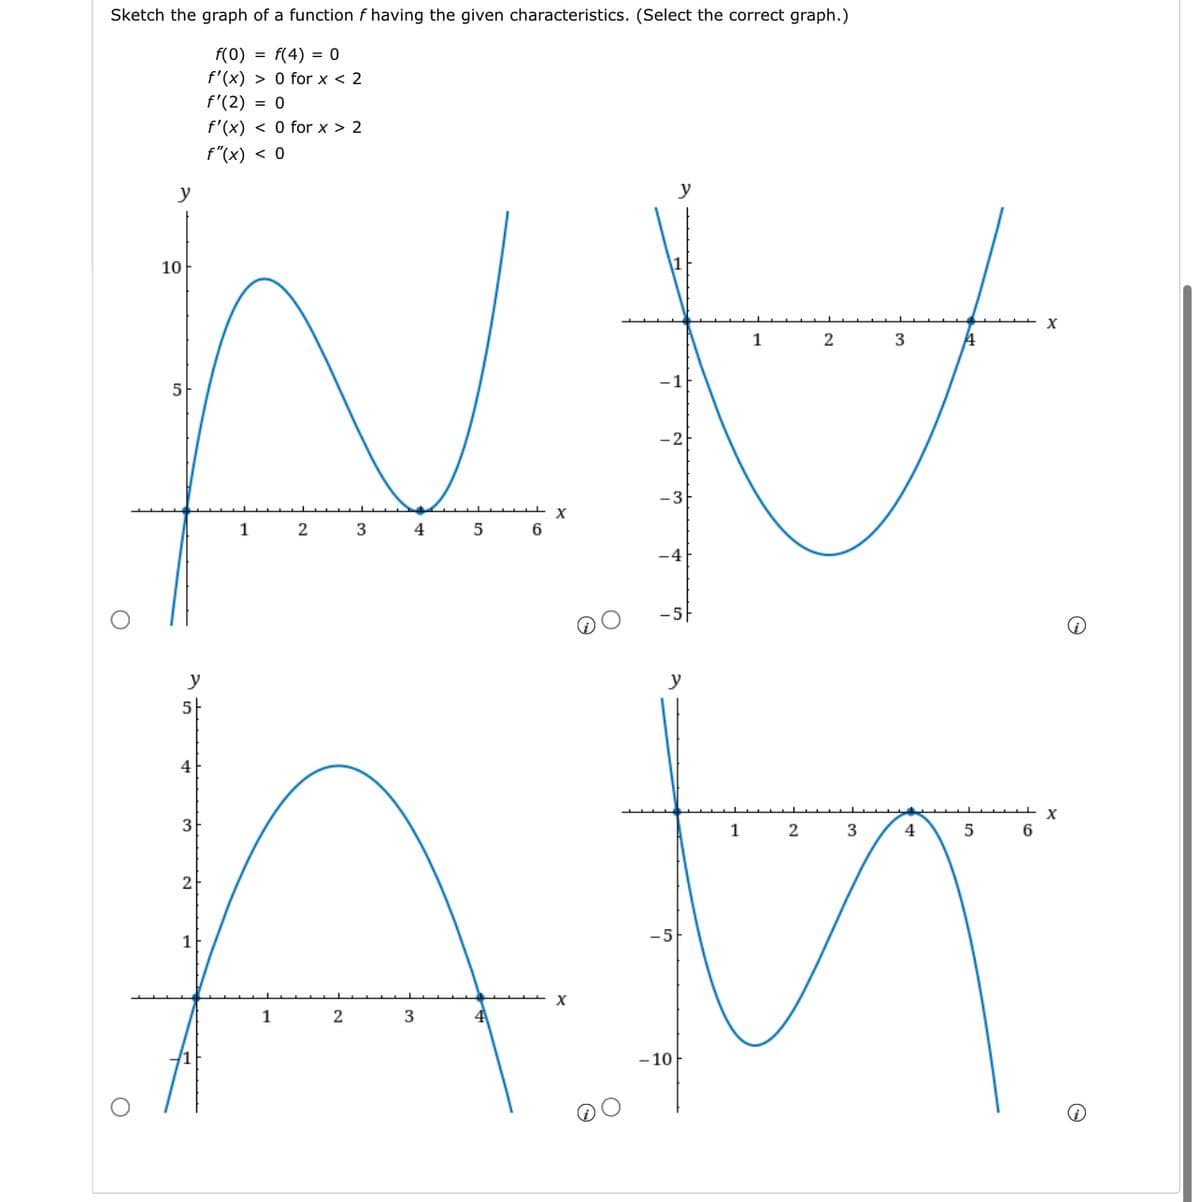 Sketch the graph of a function f having the given characteristics. (Select the correct graph.)
f(0) = f(4) = 0
f'(x) > 0 for x < 2
#
f'(2) = 0
f'(x) < 0 for x > 2
f"(x) < 0
y
1
2
-1
-2
-3
4
5
6
-4
-5
WN
Att
1
2
X
3
4
-10
10
5
y
5
4
3
2
1
1
1
2
2
3
3
3
4
A
5
6
X
X